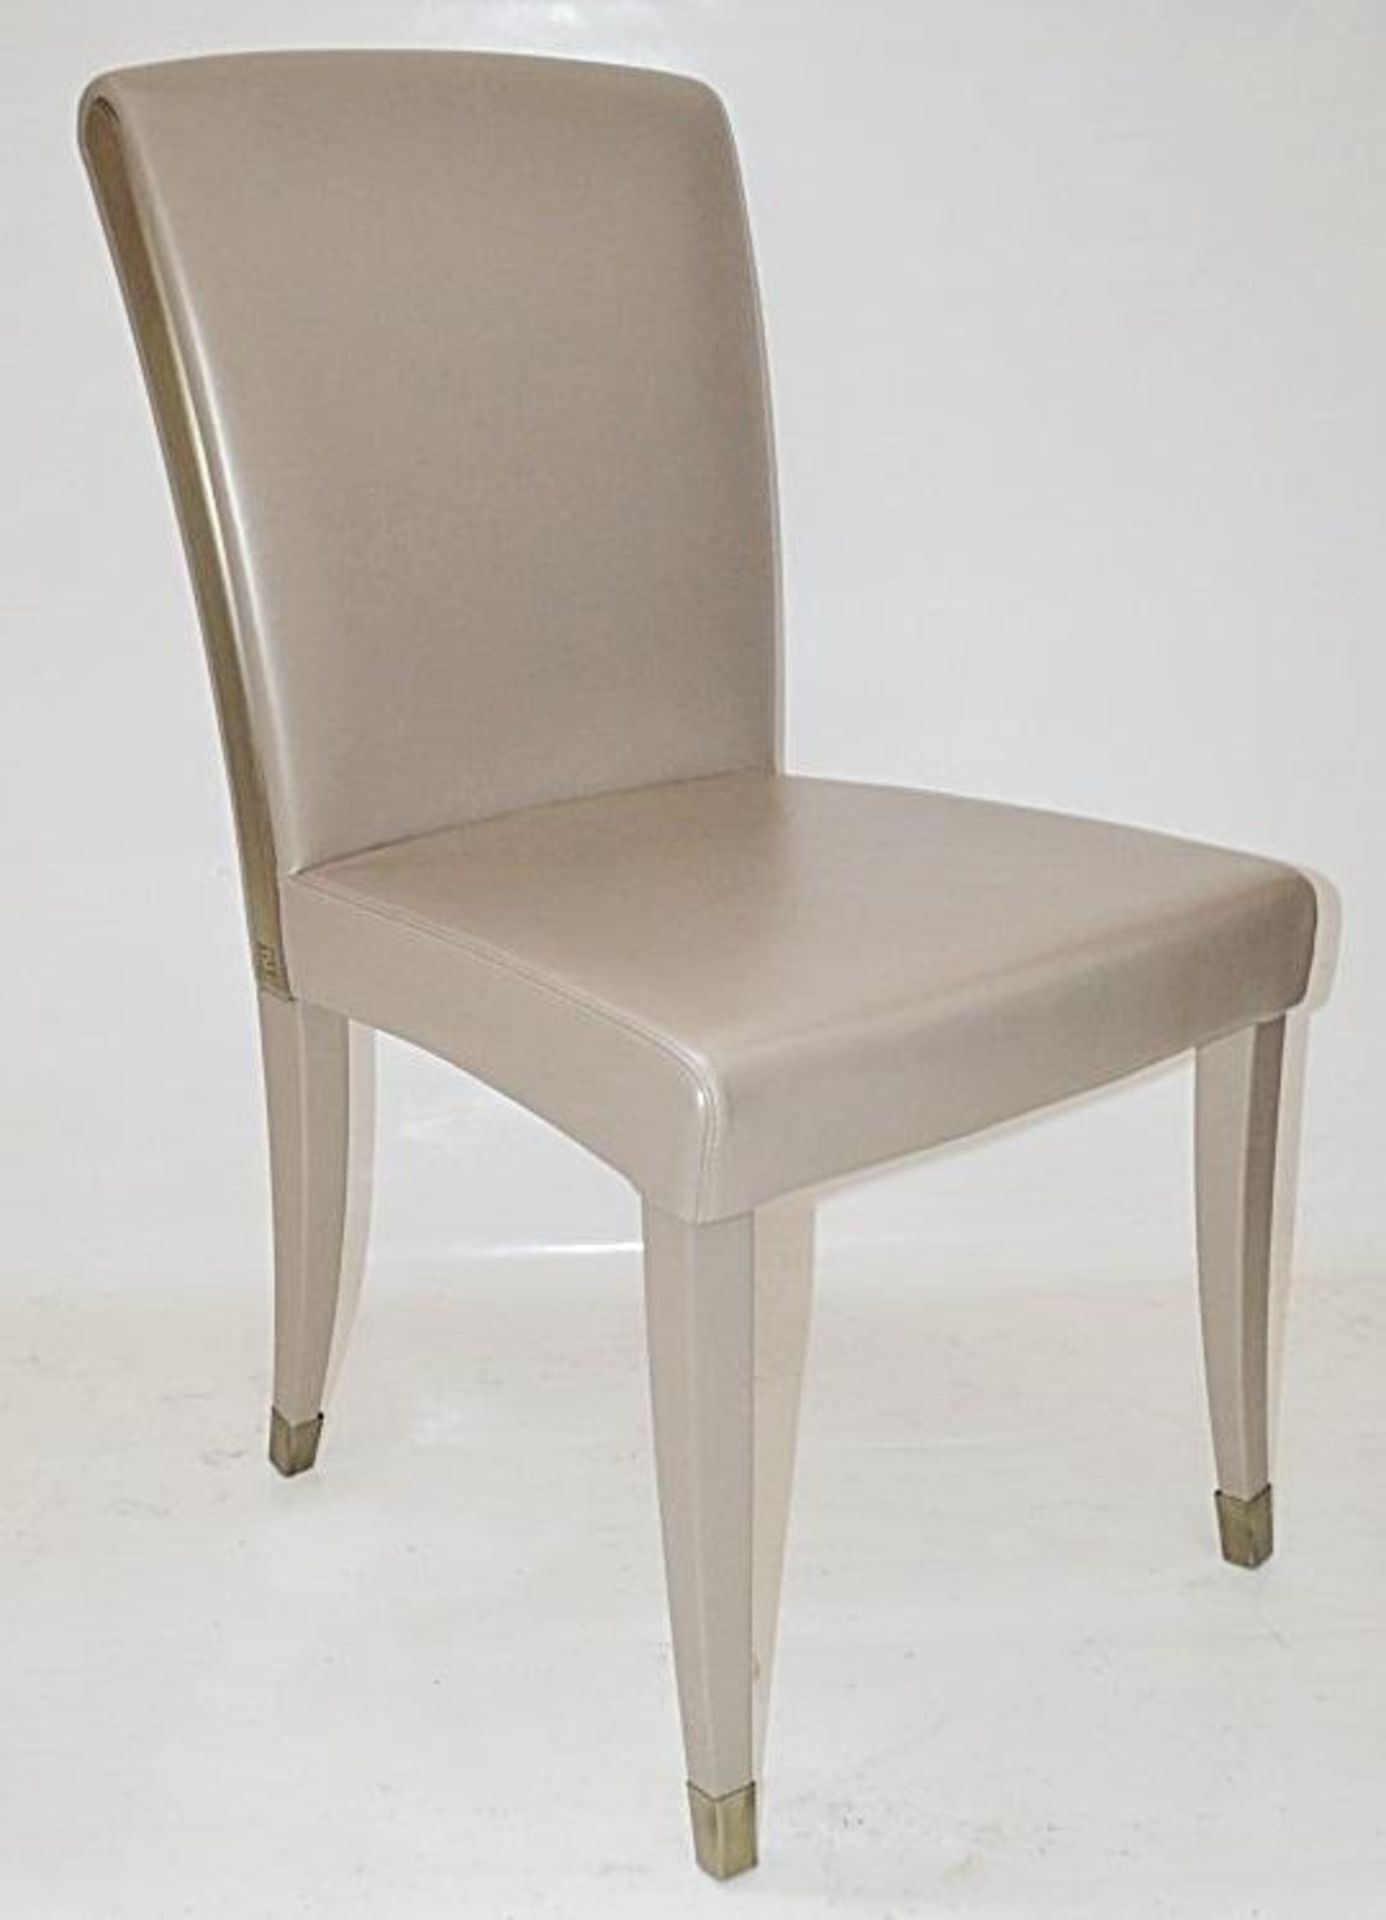 4 x FENDI CASA Elisa Leather Upholstered Dining Chairs - Colour: Light Fawn / Brass - Ref: 5391999 N